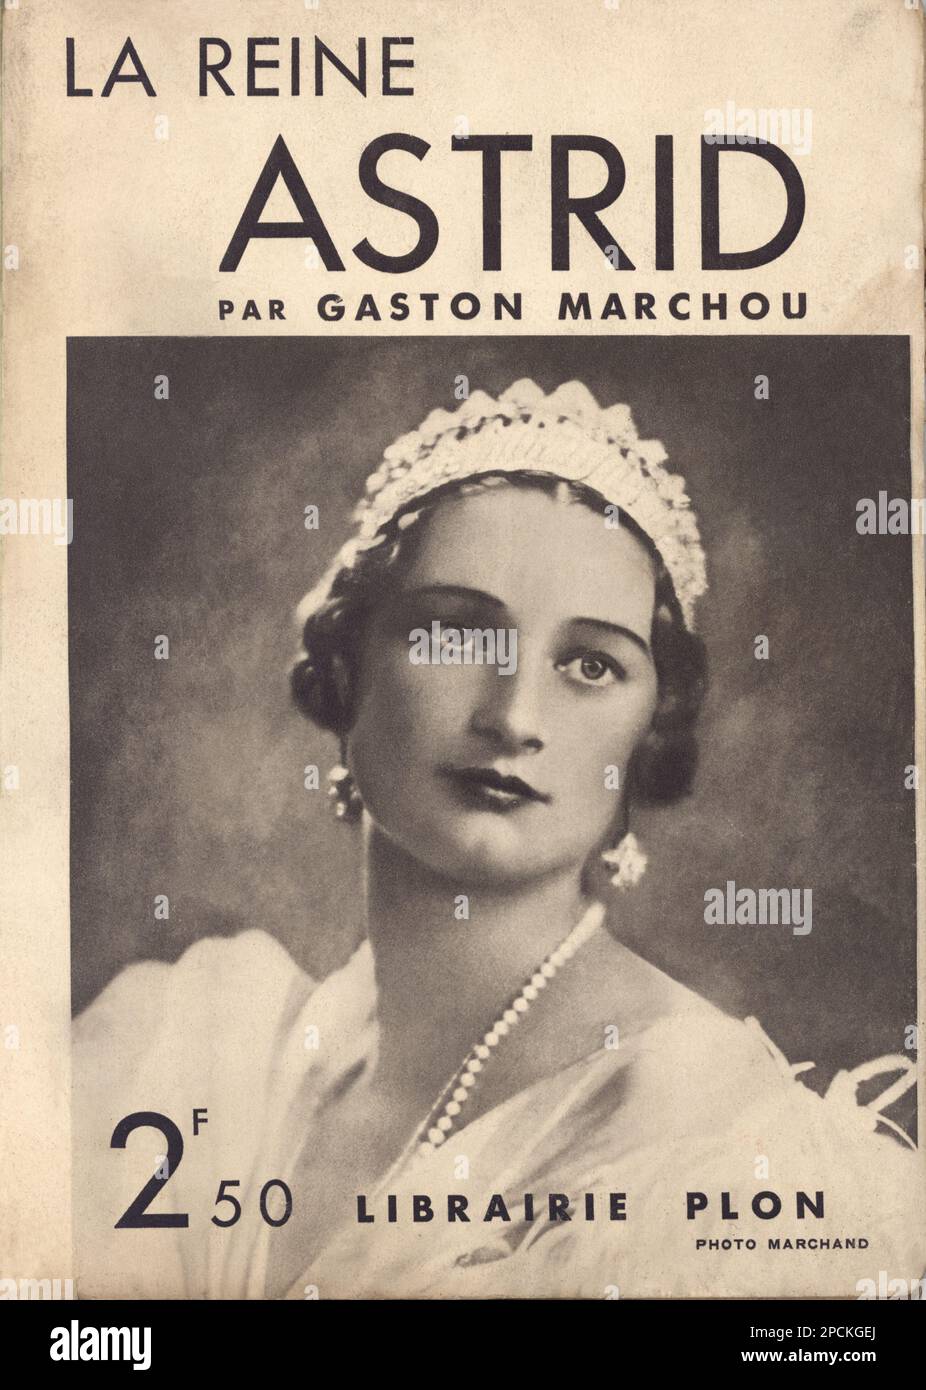 1935 , BELGIUM : The Queen ASTRID of BELGIUM ( born princesse of Sweden , 1905 - 1935 ), married to King LEOPOLD III of Belgians   SAXE COBURG GOTHA ( 1901 - 1983 ). Istant book after the death of Astrid in a car accident by Gaston Marchou , Librairie Plon , 1935 - House of BRABANT - BRABANTE - royalty - nobili - nobiltà - principessa reale - BELGIO - portrait - ritratto -  libro - book - cover - copertina - SVEZIA - HISTORY - FOTO STORICHE - crown - corona - diadema - pearls necklace - collana di perle  ----  Archivio GBB Stock Photo